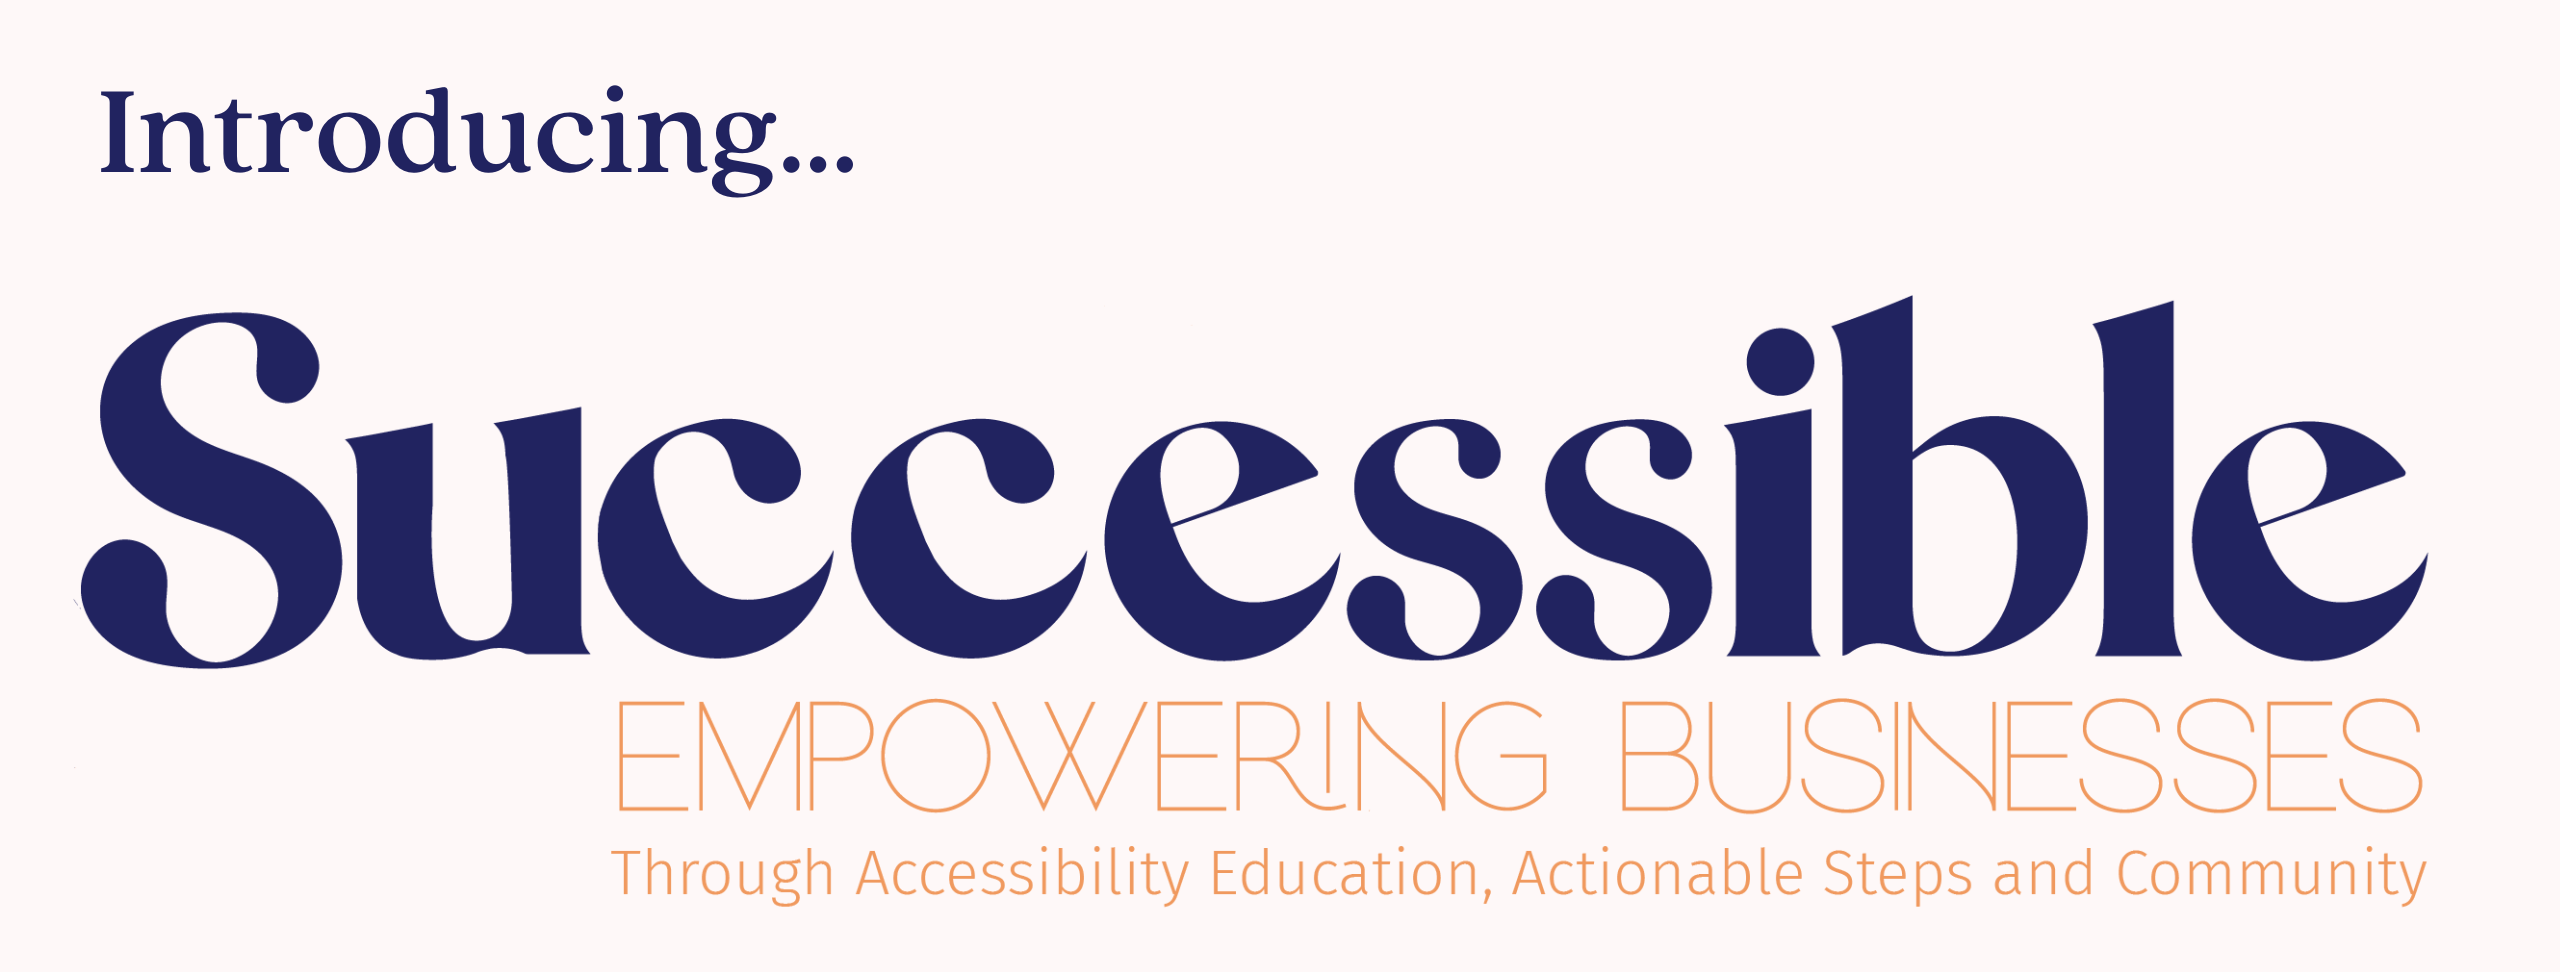 Text reads "Introducing Successible - Empowering Businesses Through Accessibility Education, Actionable Steps and Community"